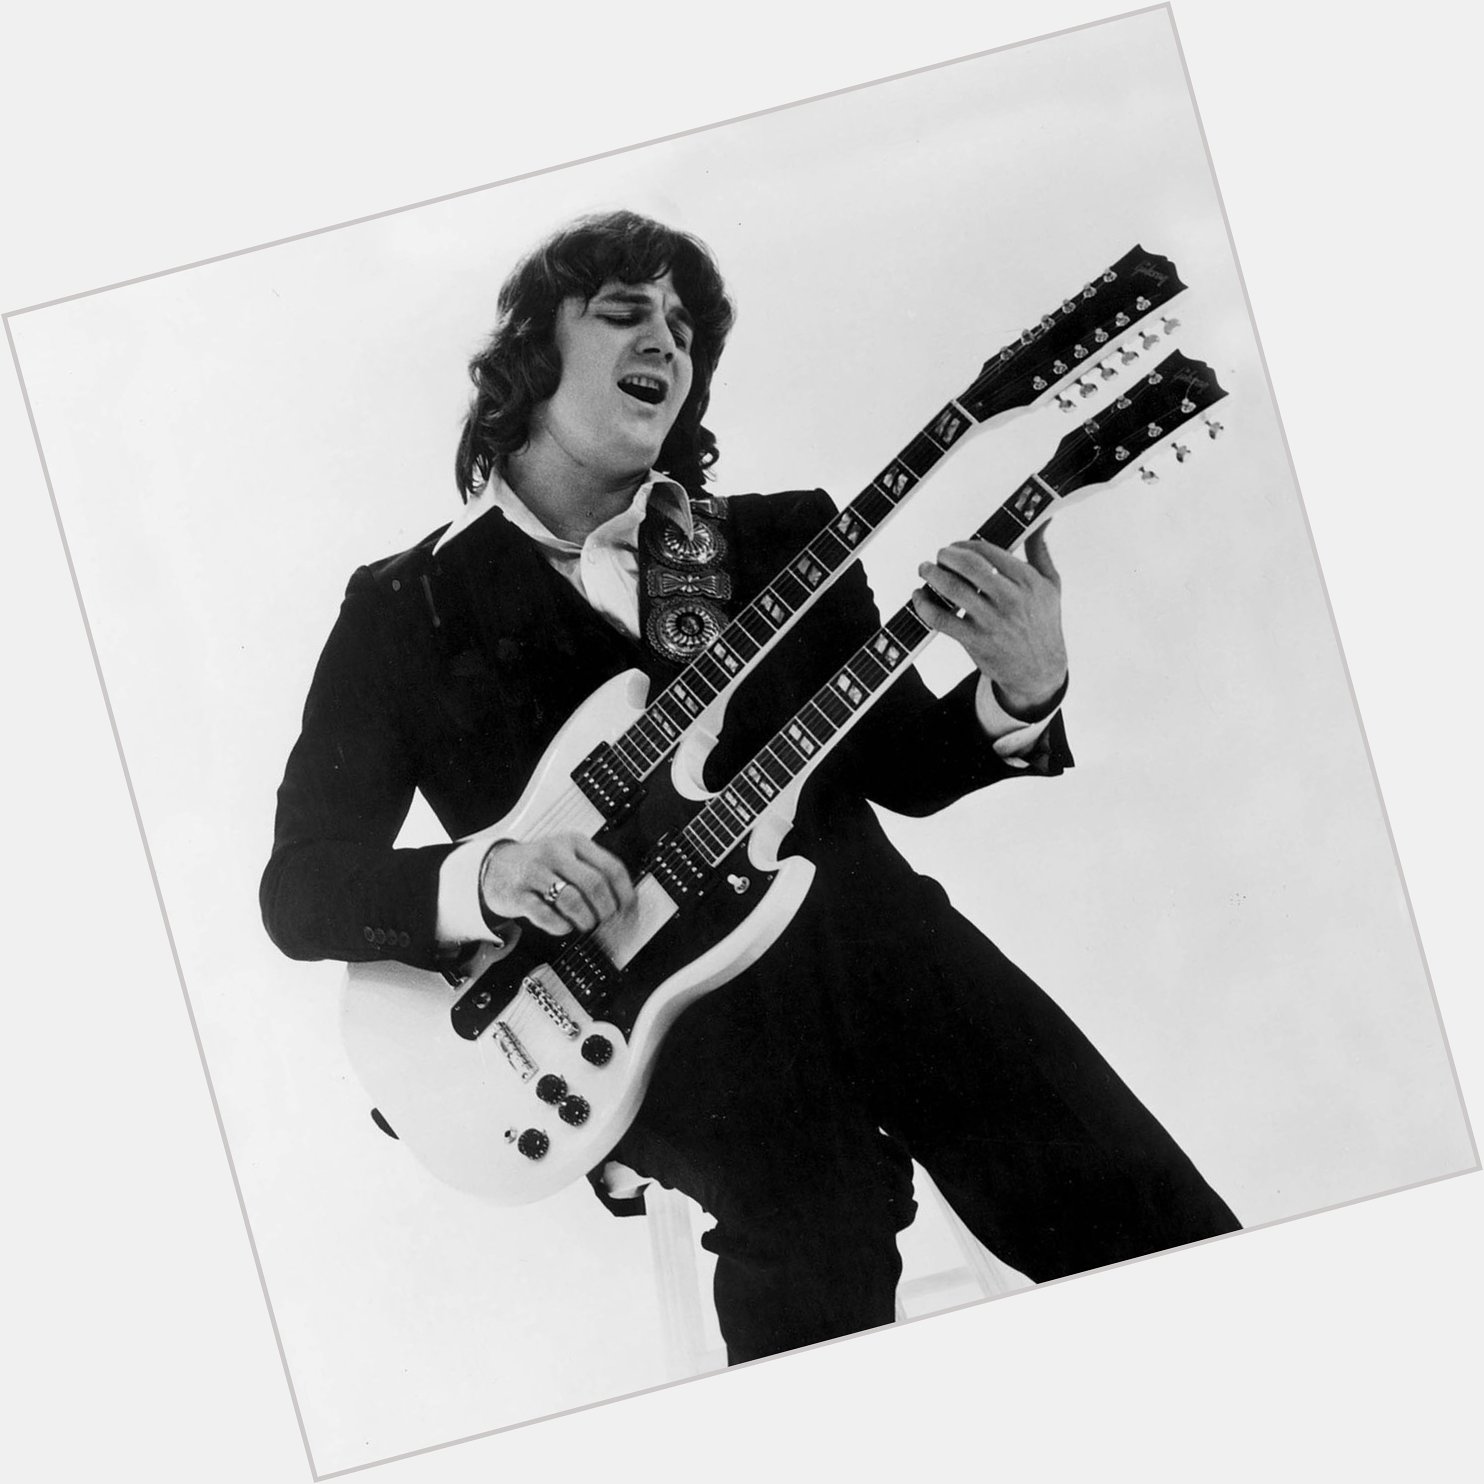 Steve Miller is74years old today. He was born on 5 October 1943 Happy birthday Steve! 